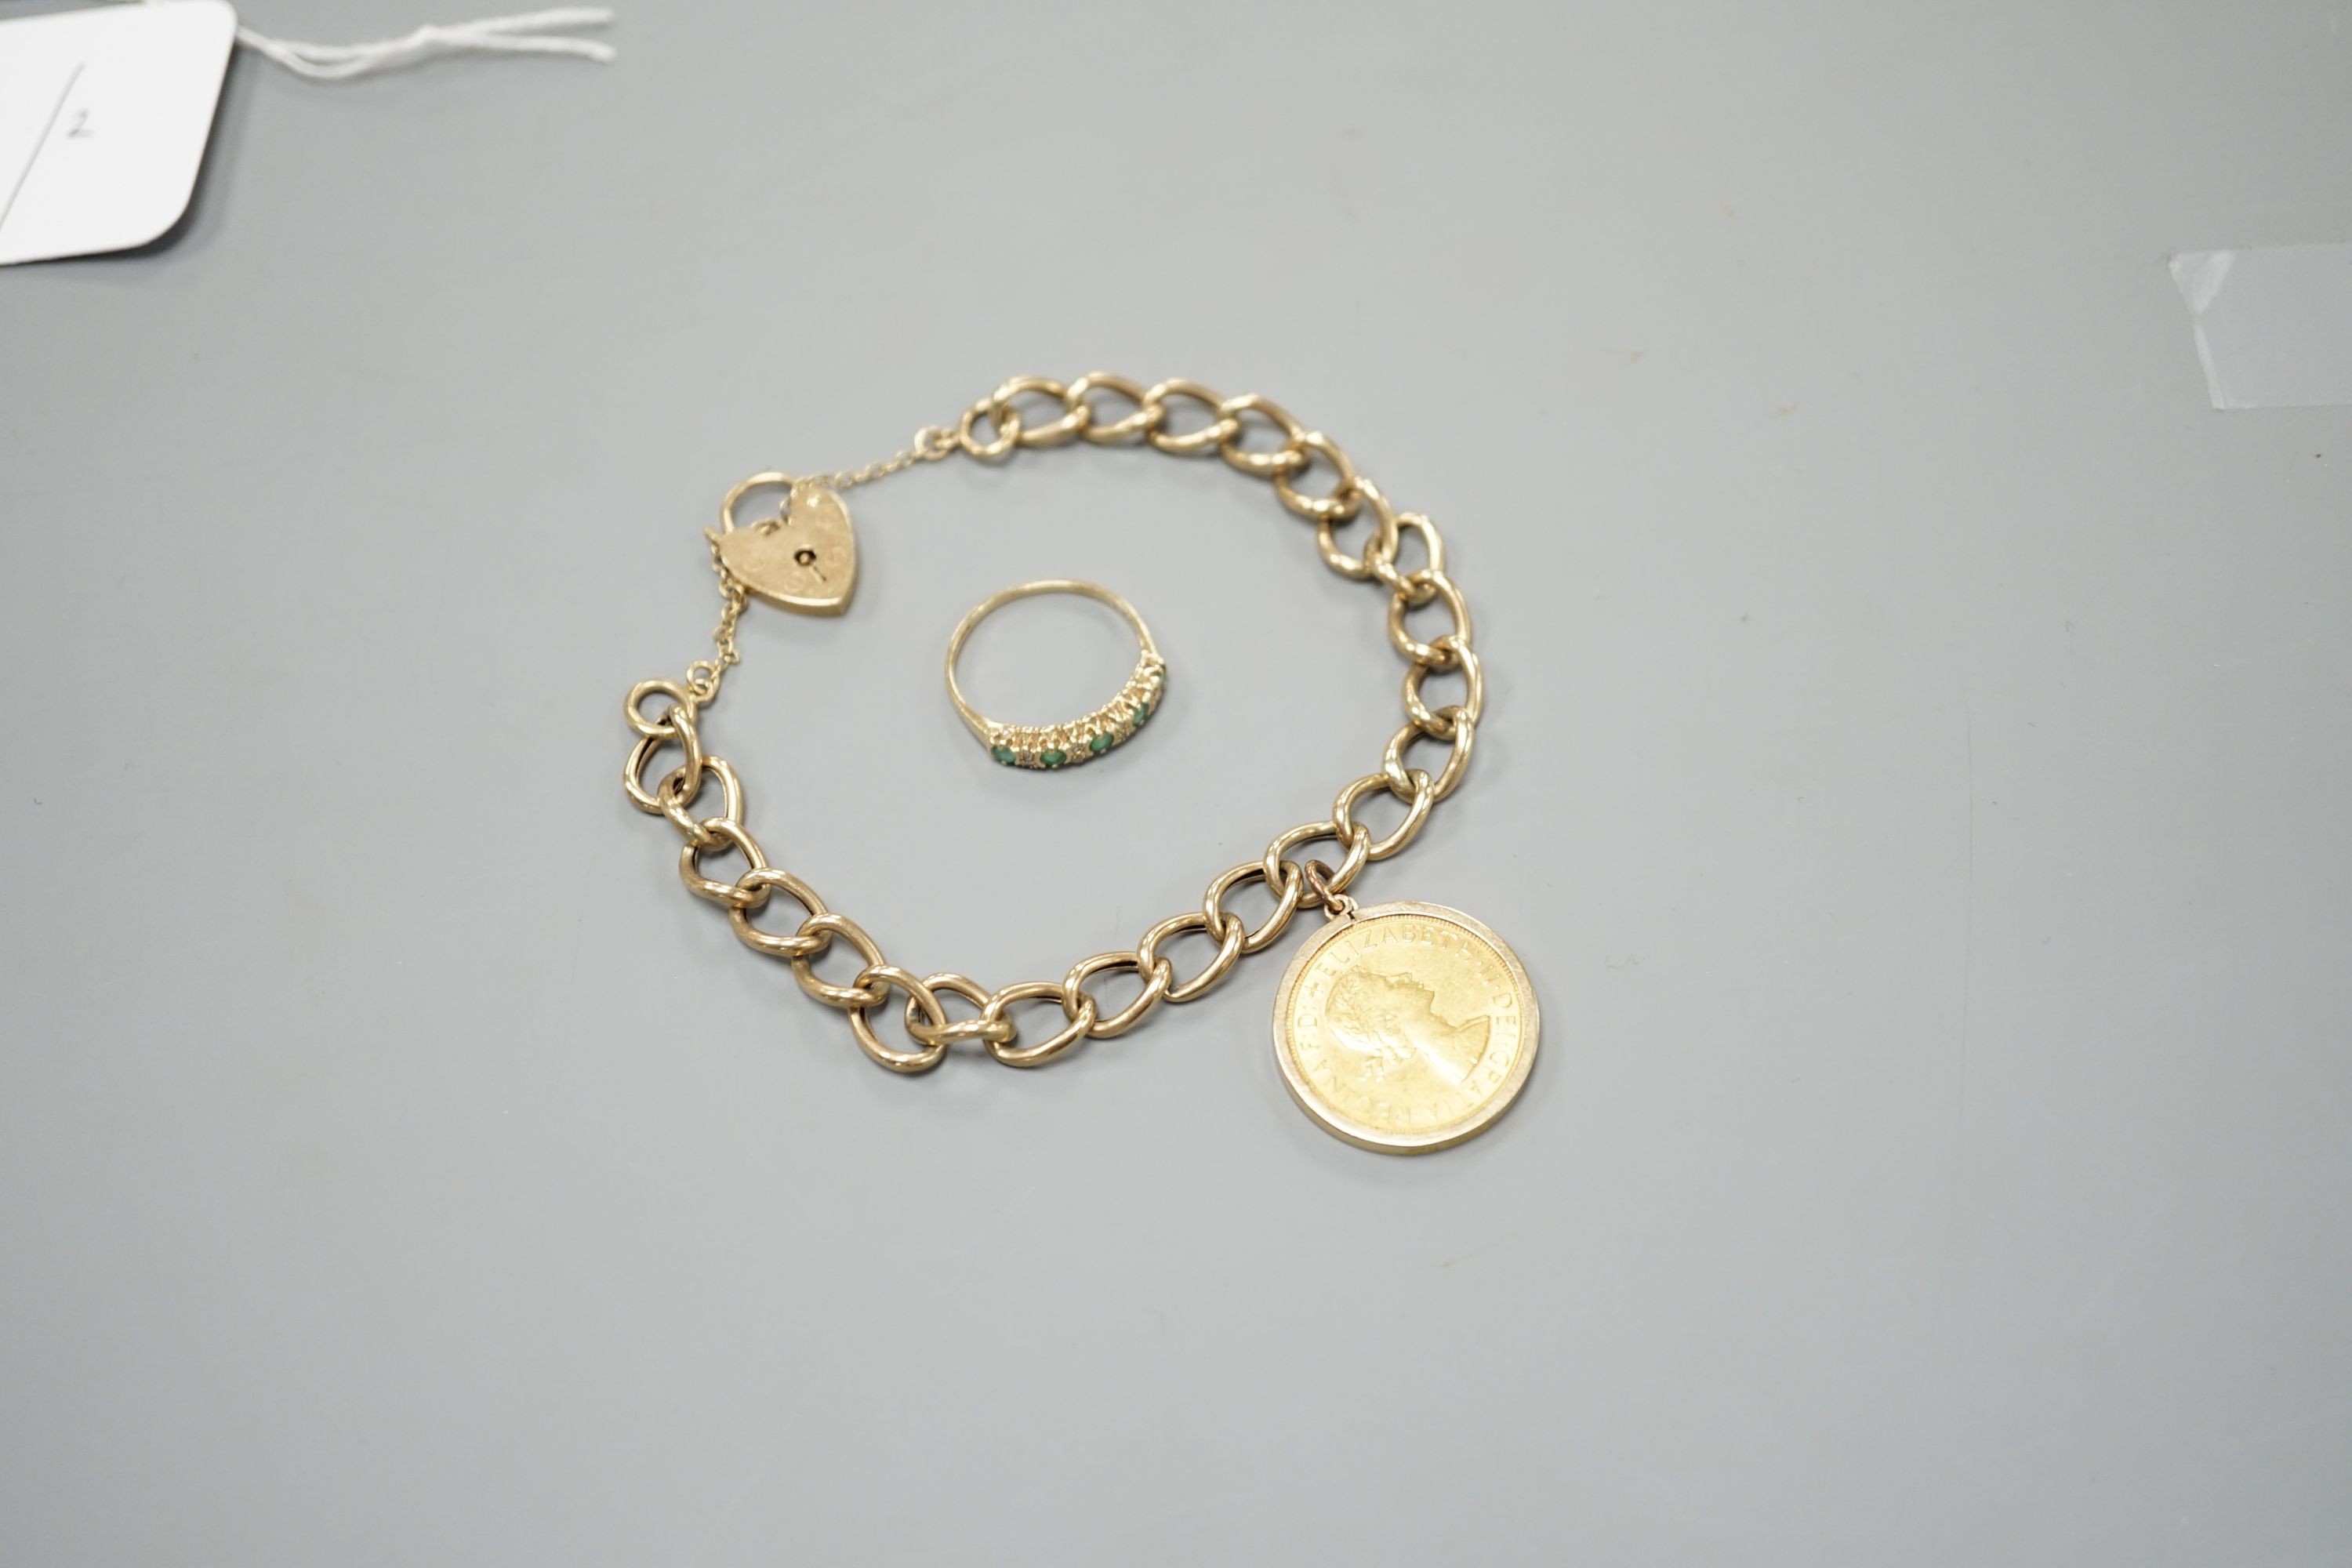 A 1962 gold sovereign, on 9ct bracelet with a 9ct gold gem set ring, gross weight 17.7 grams.